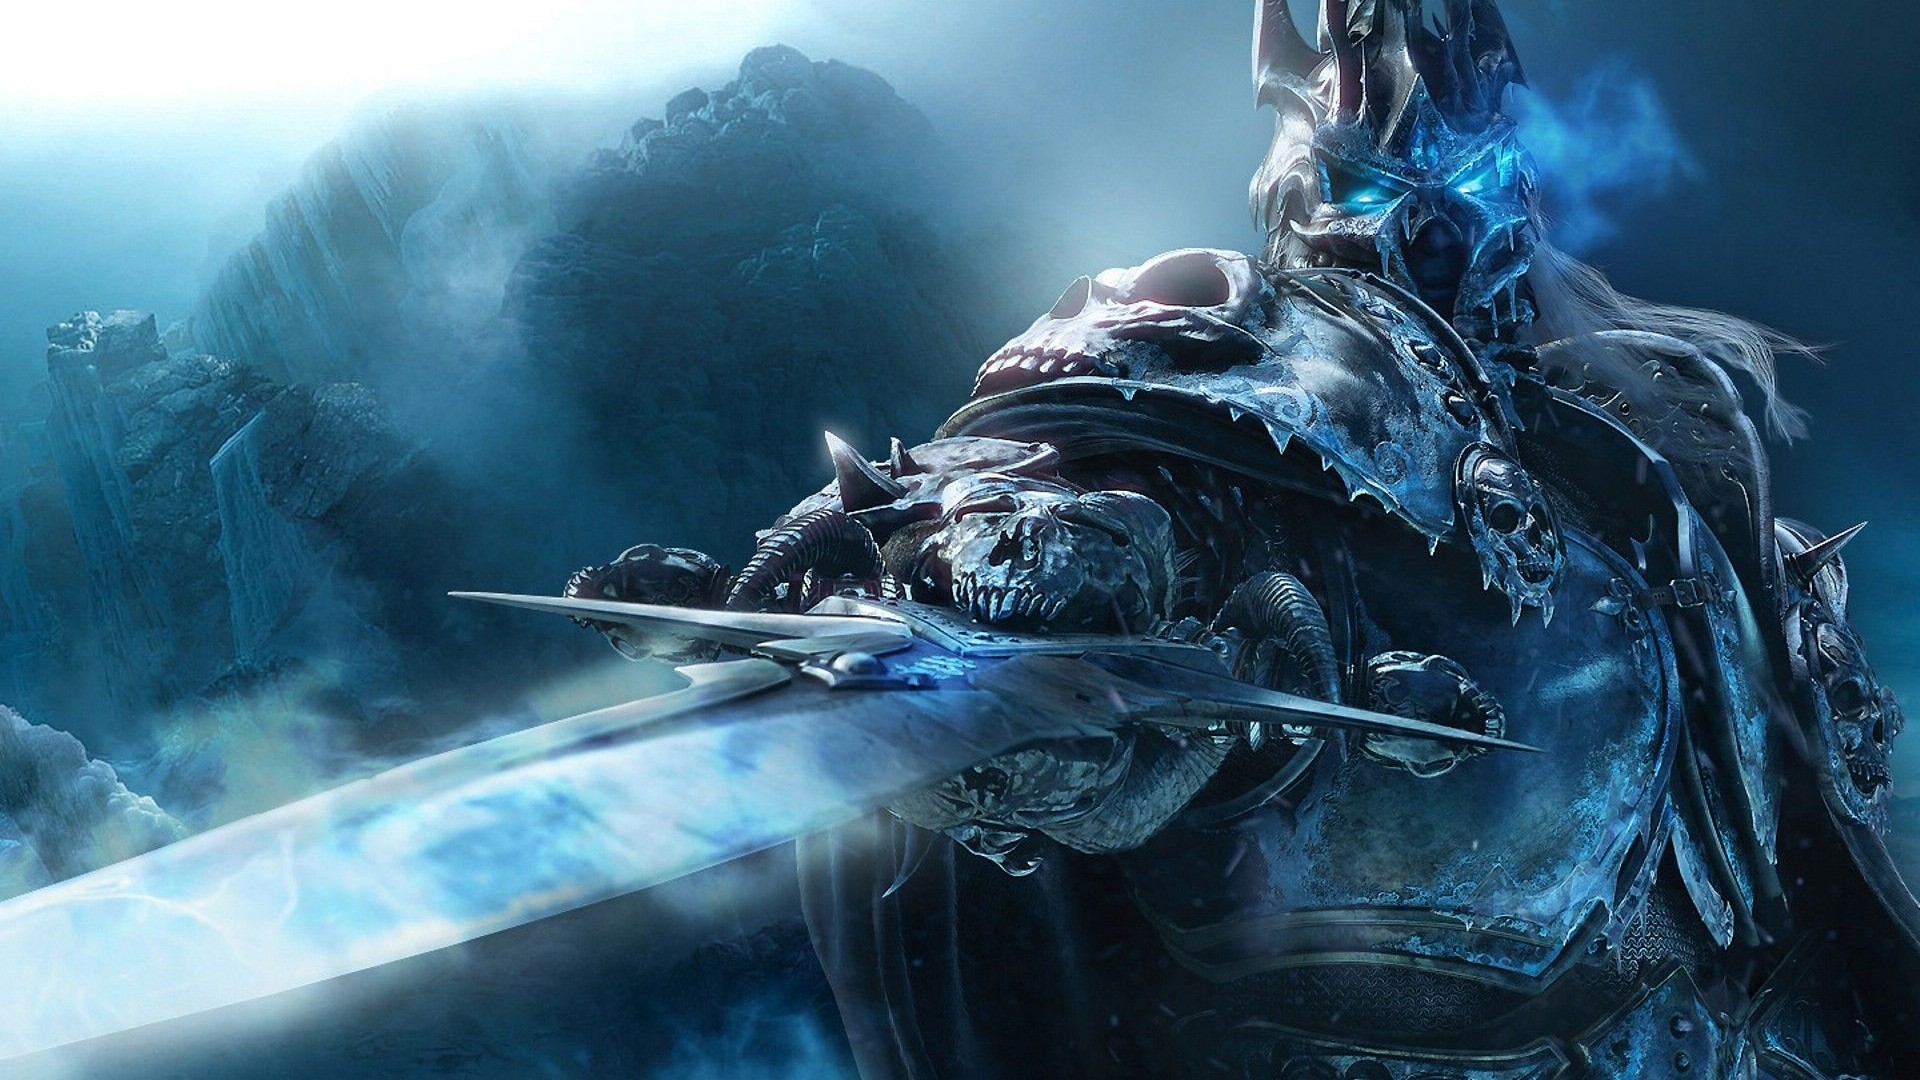 World of Warcraft Wrath of the Lich King Wallpapers Screenshots